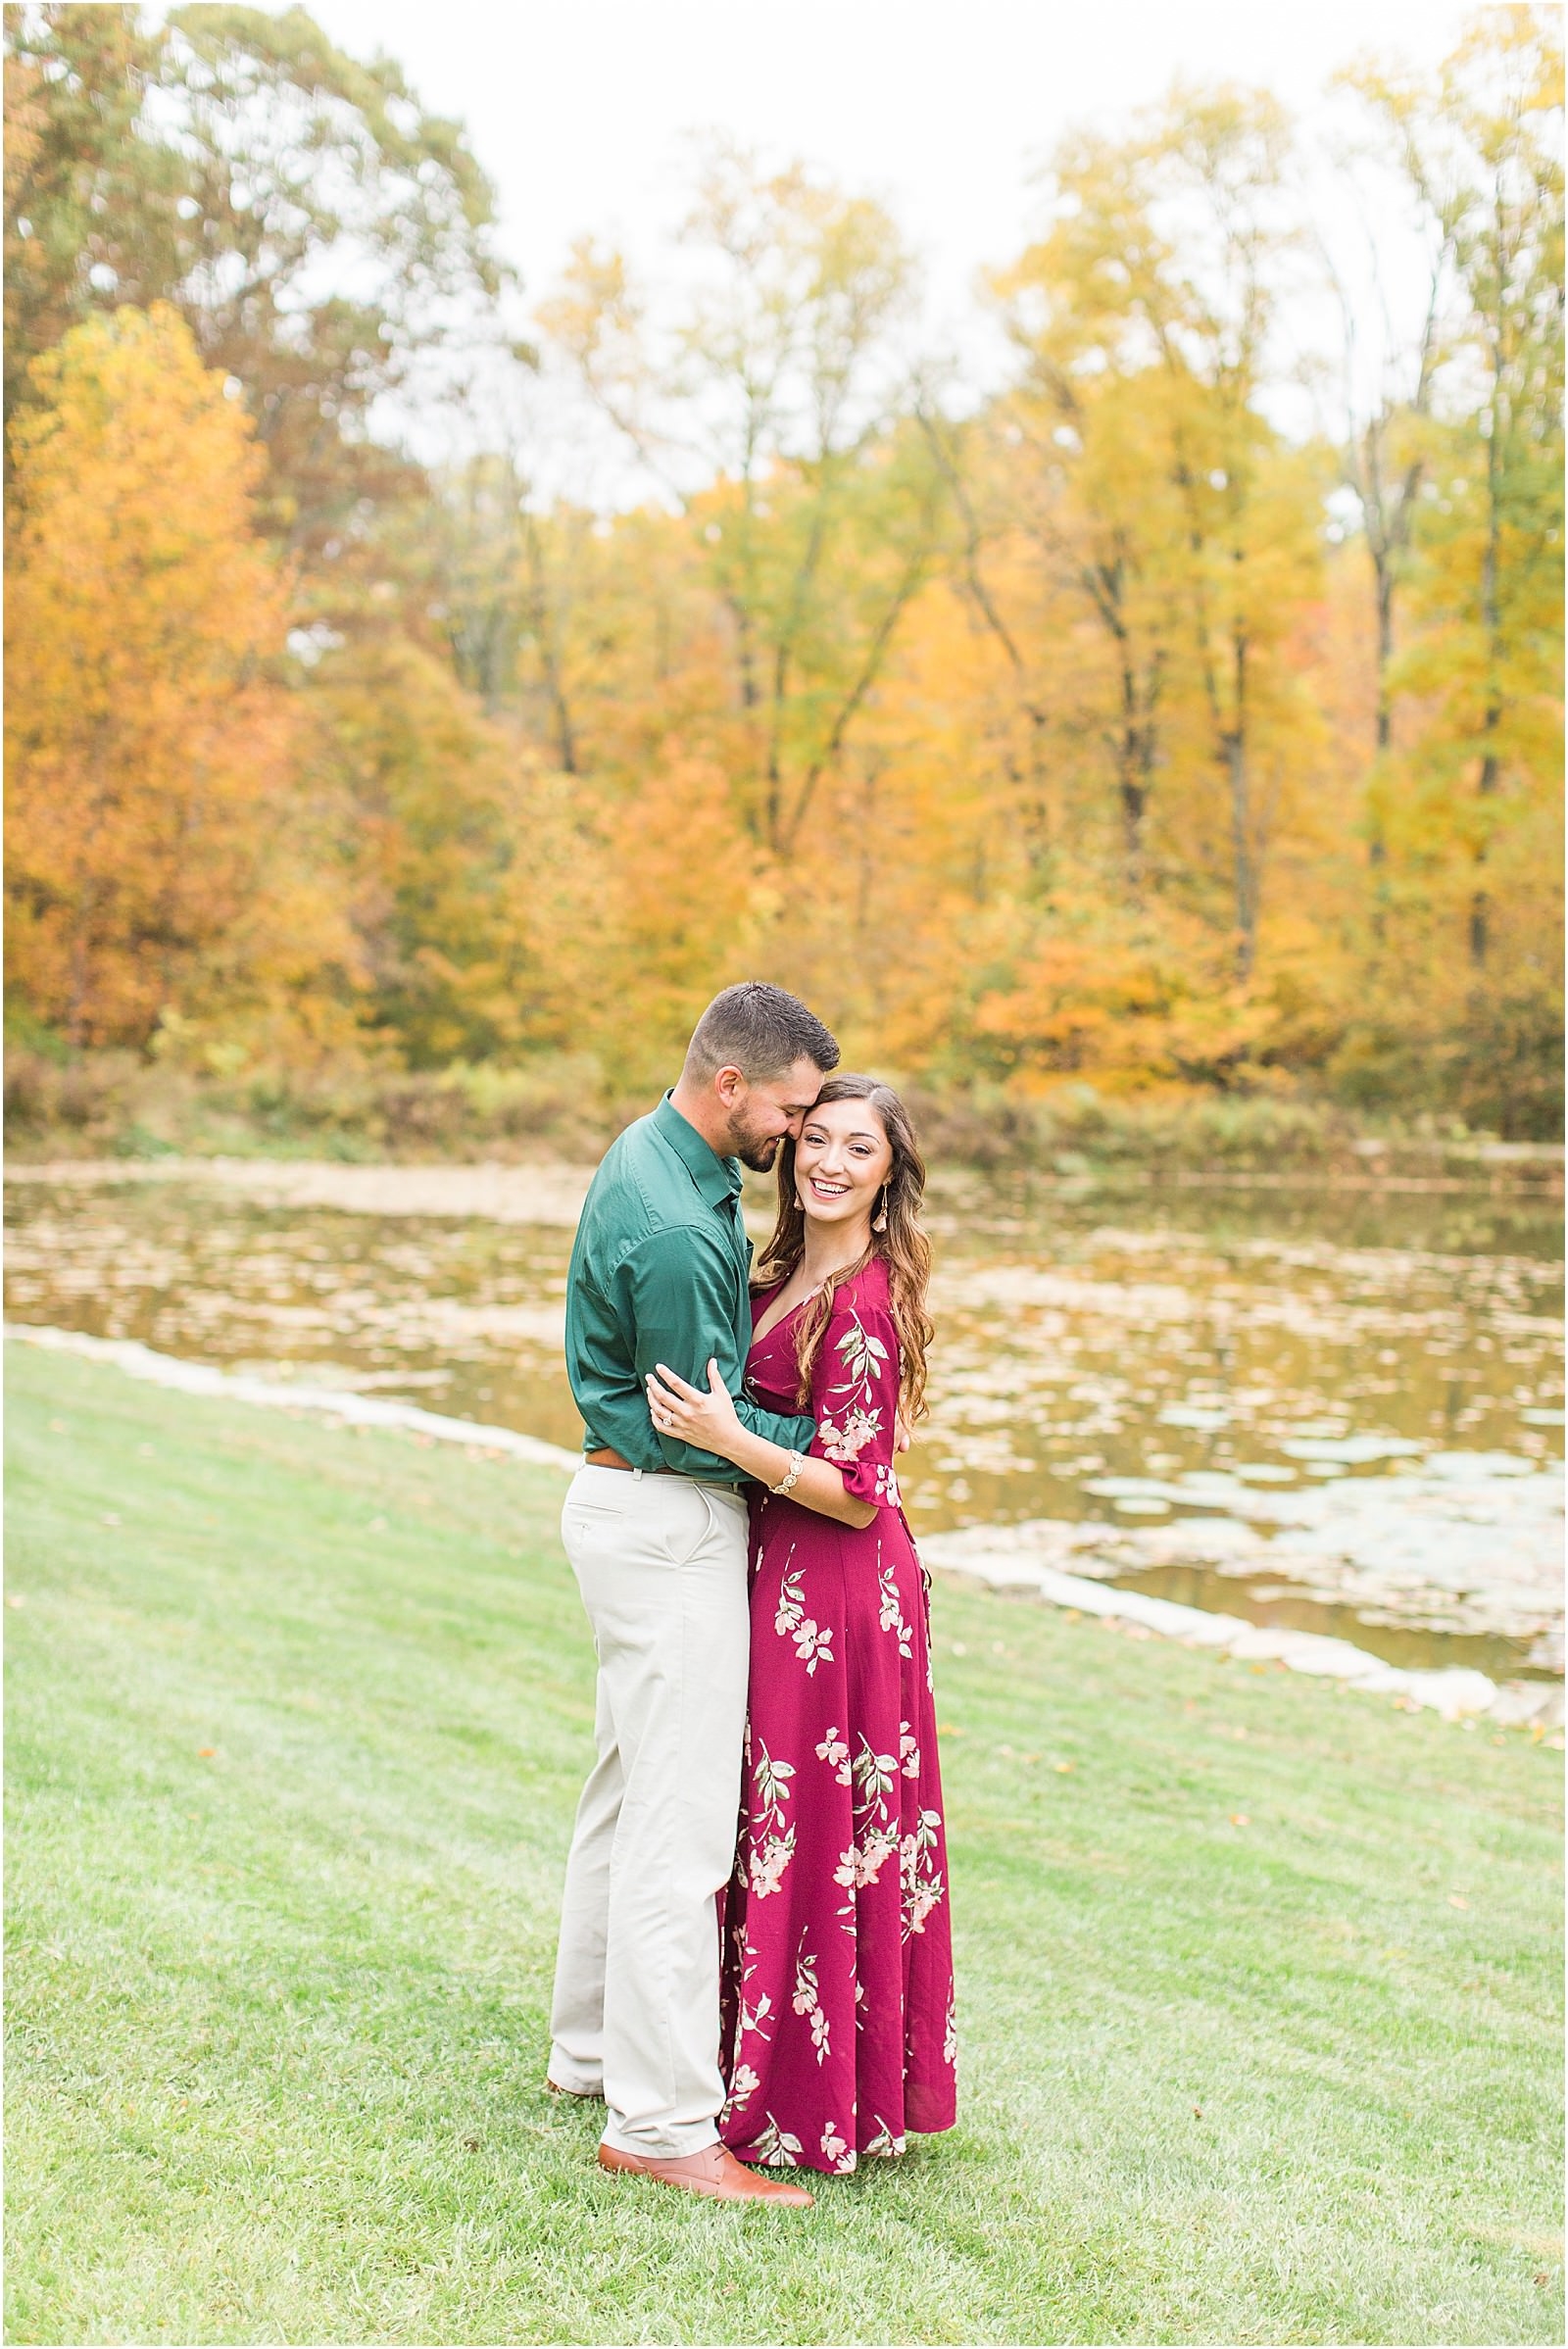 A Fall Oliver Winery Engagement Session | Sally and Andrew | Bret and Brandie Photography 0004.jpg